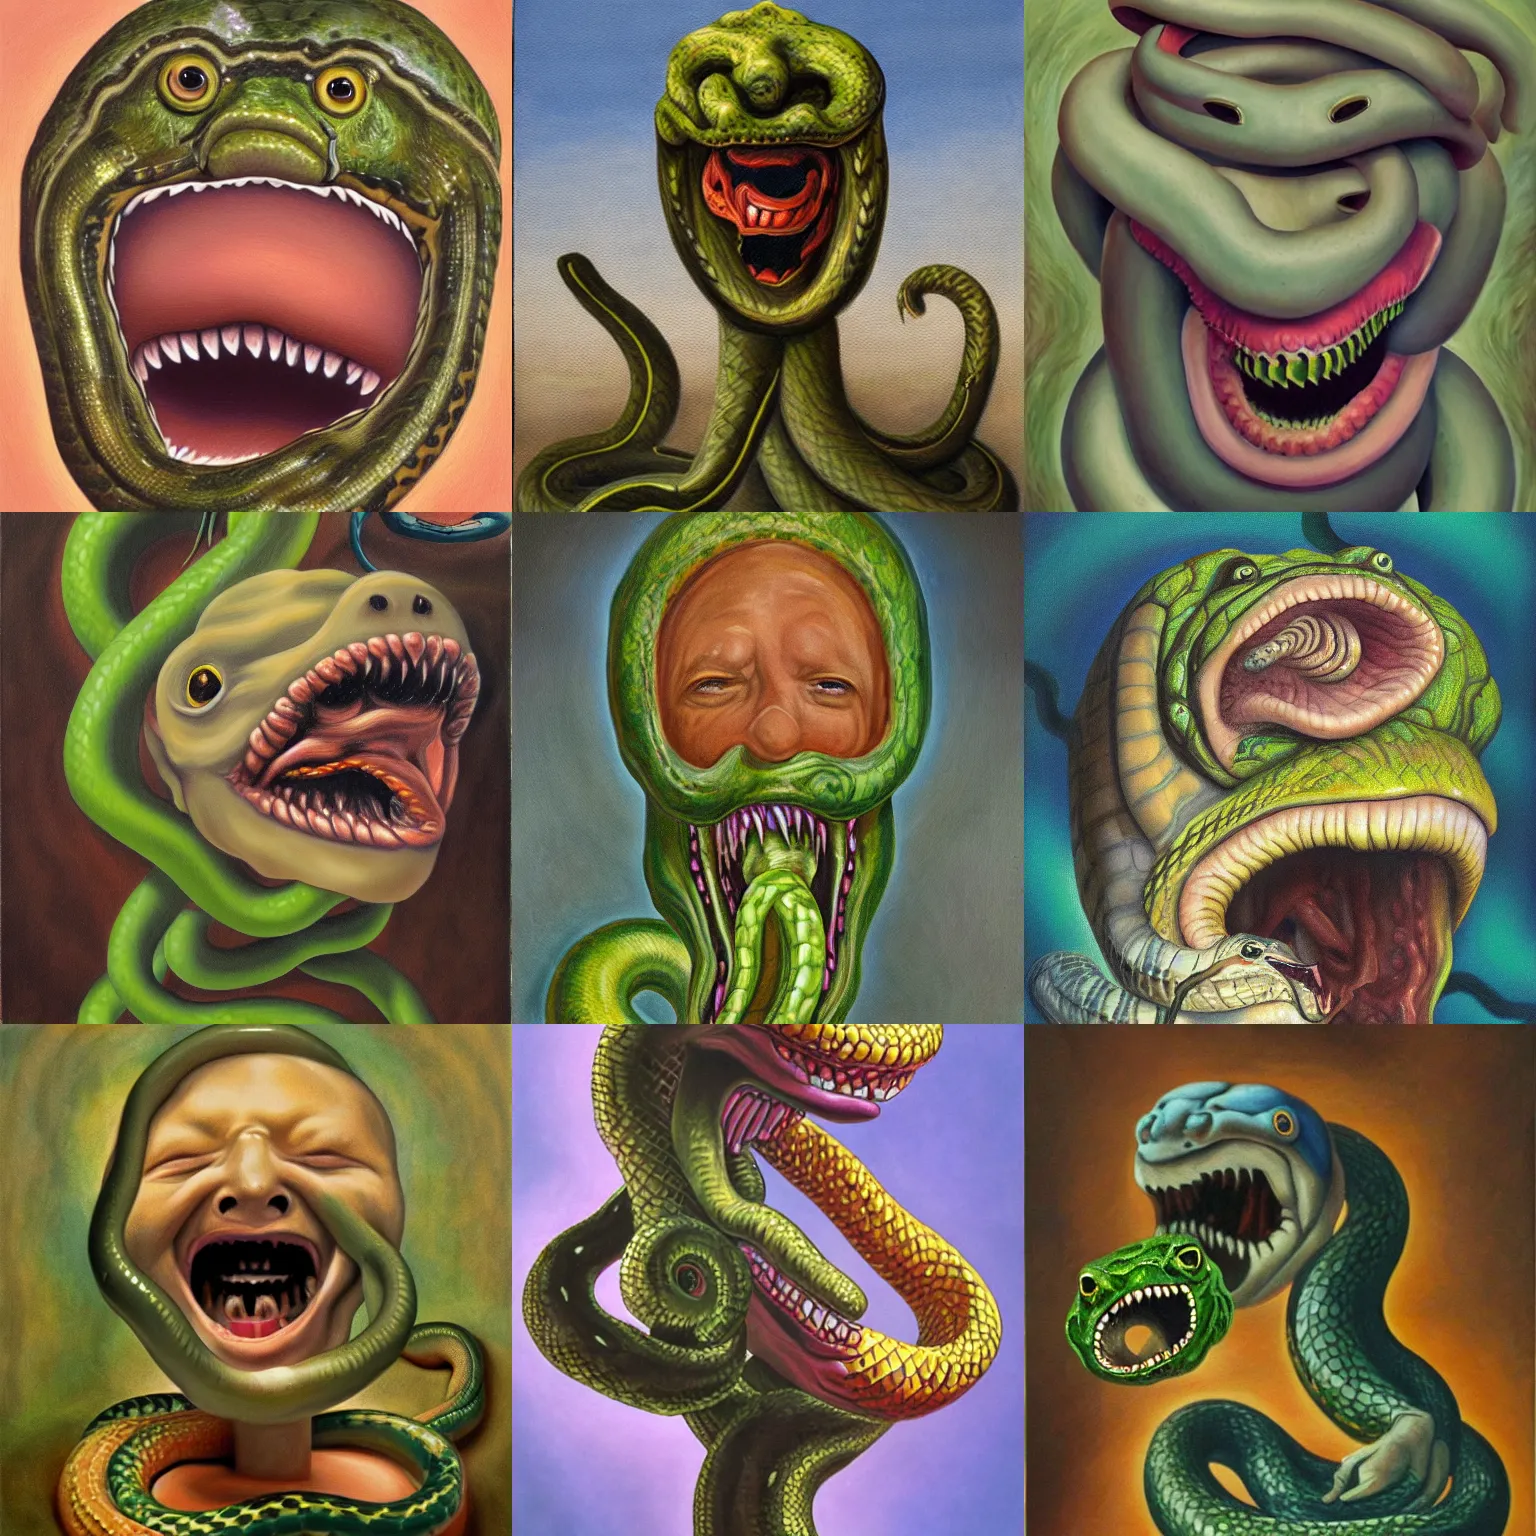 Prompt: A disembodied head screaming + snakes slithering out of its mouth, oil painting, surrealism style